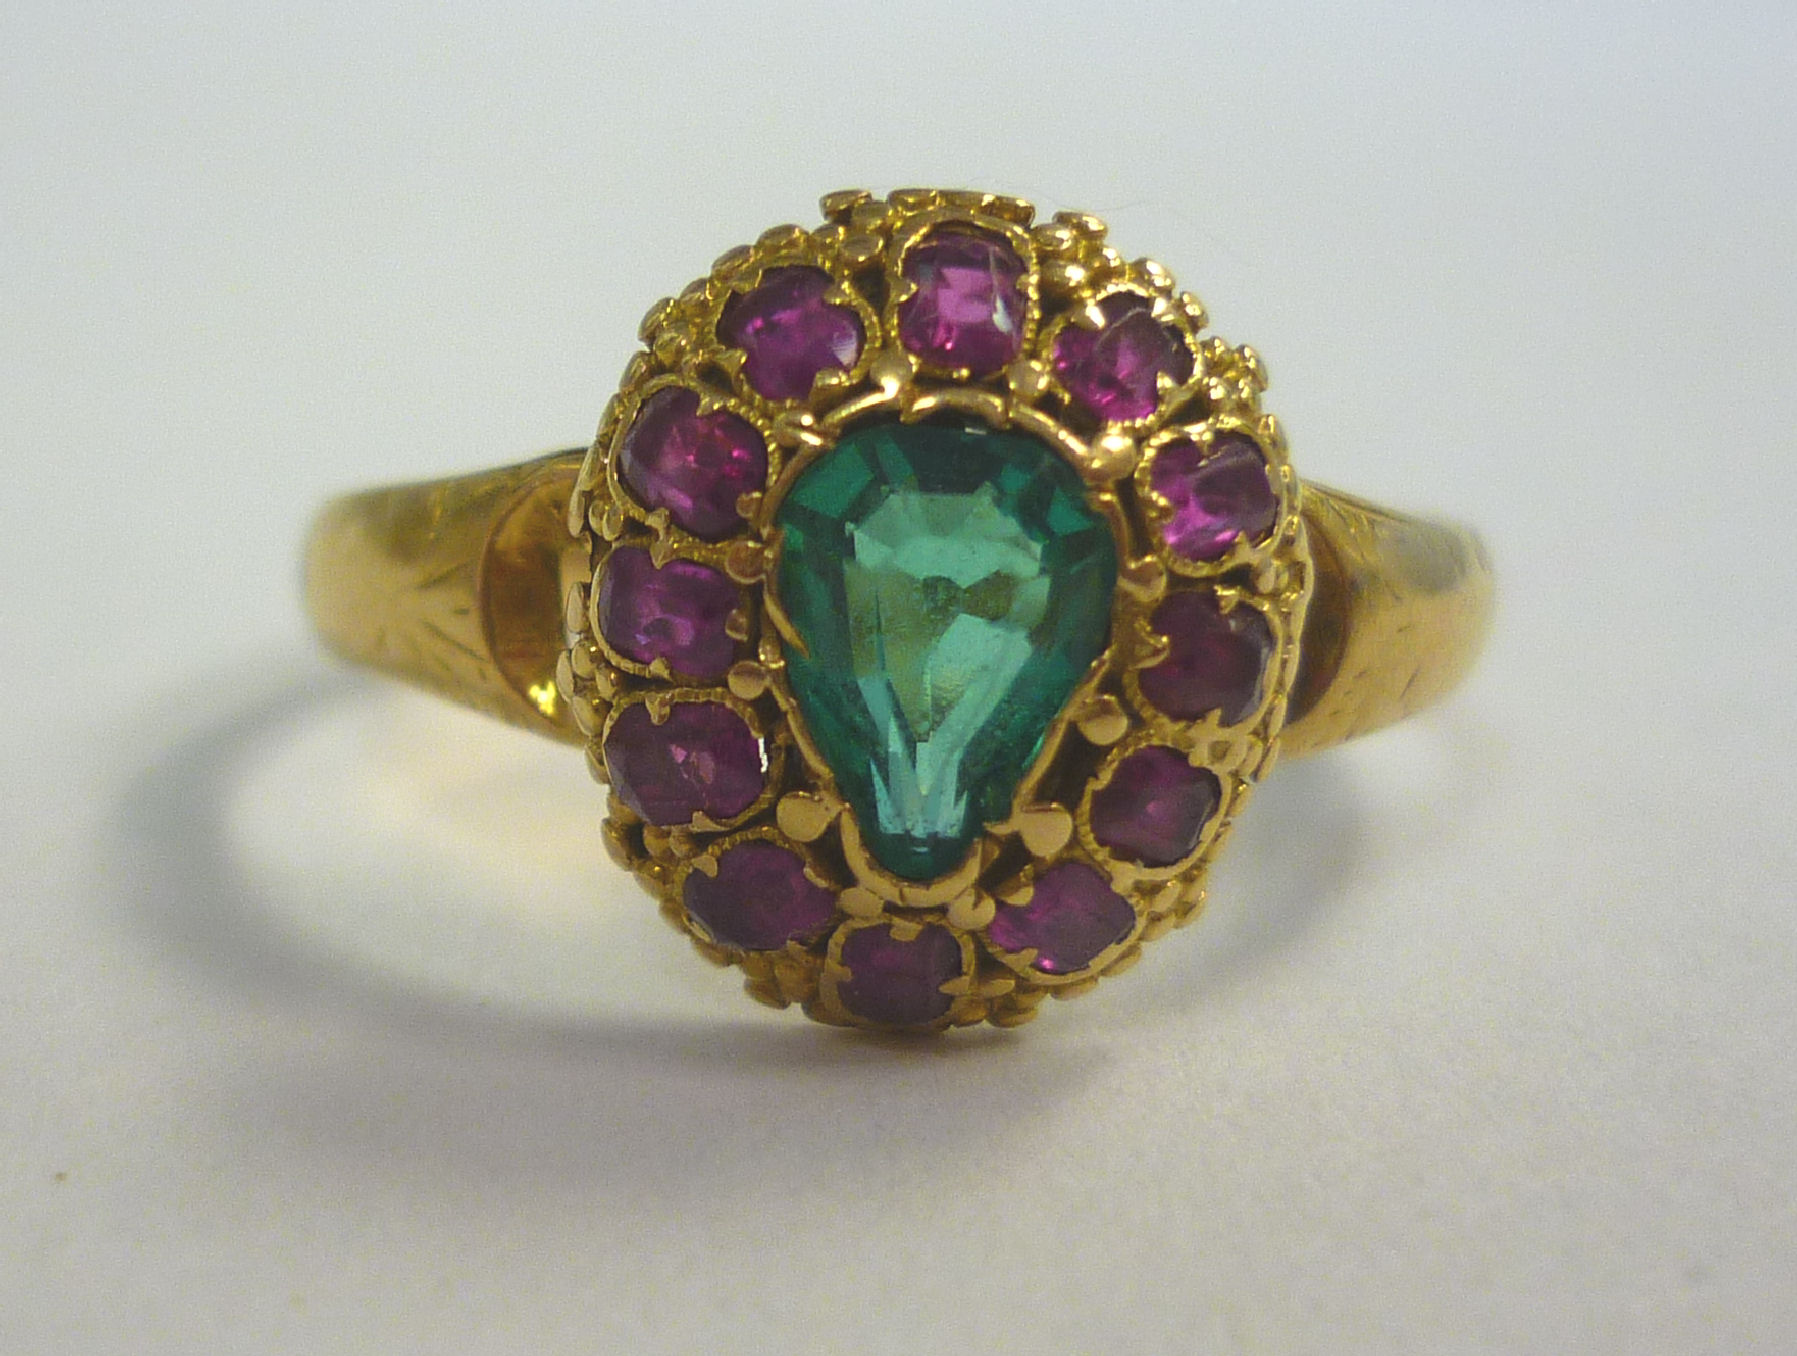 An 18ct gold ring, set with a central emerald, surrounded by rubies